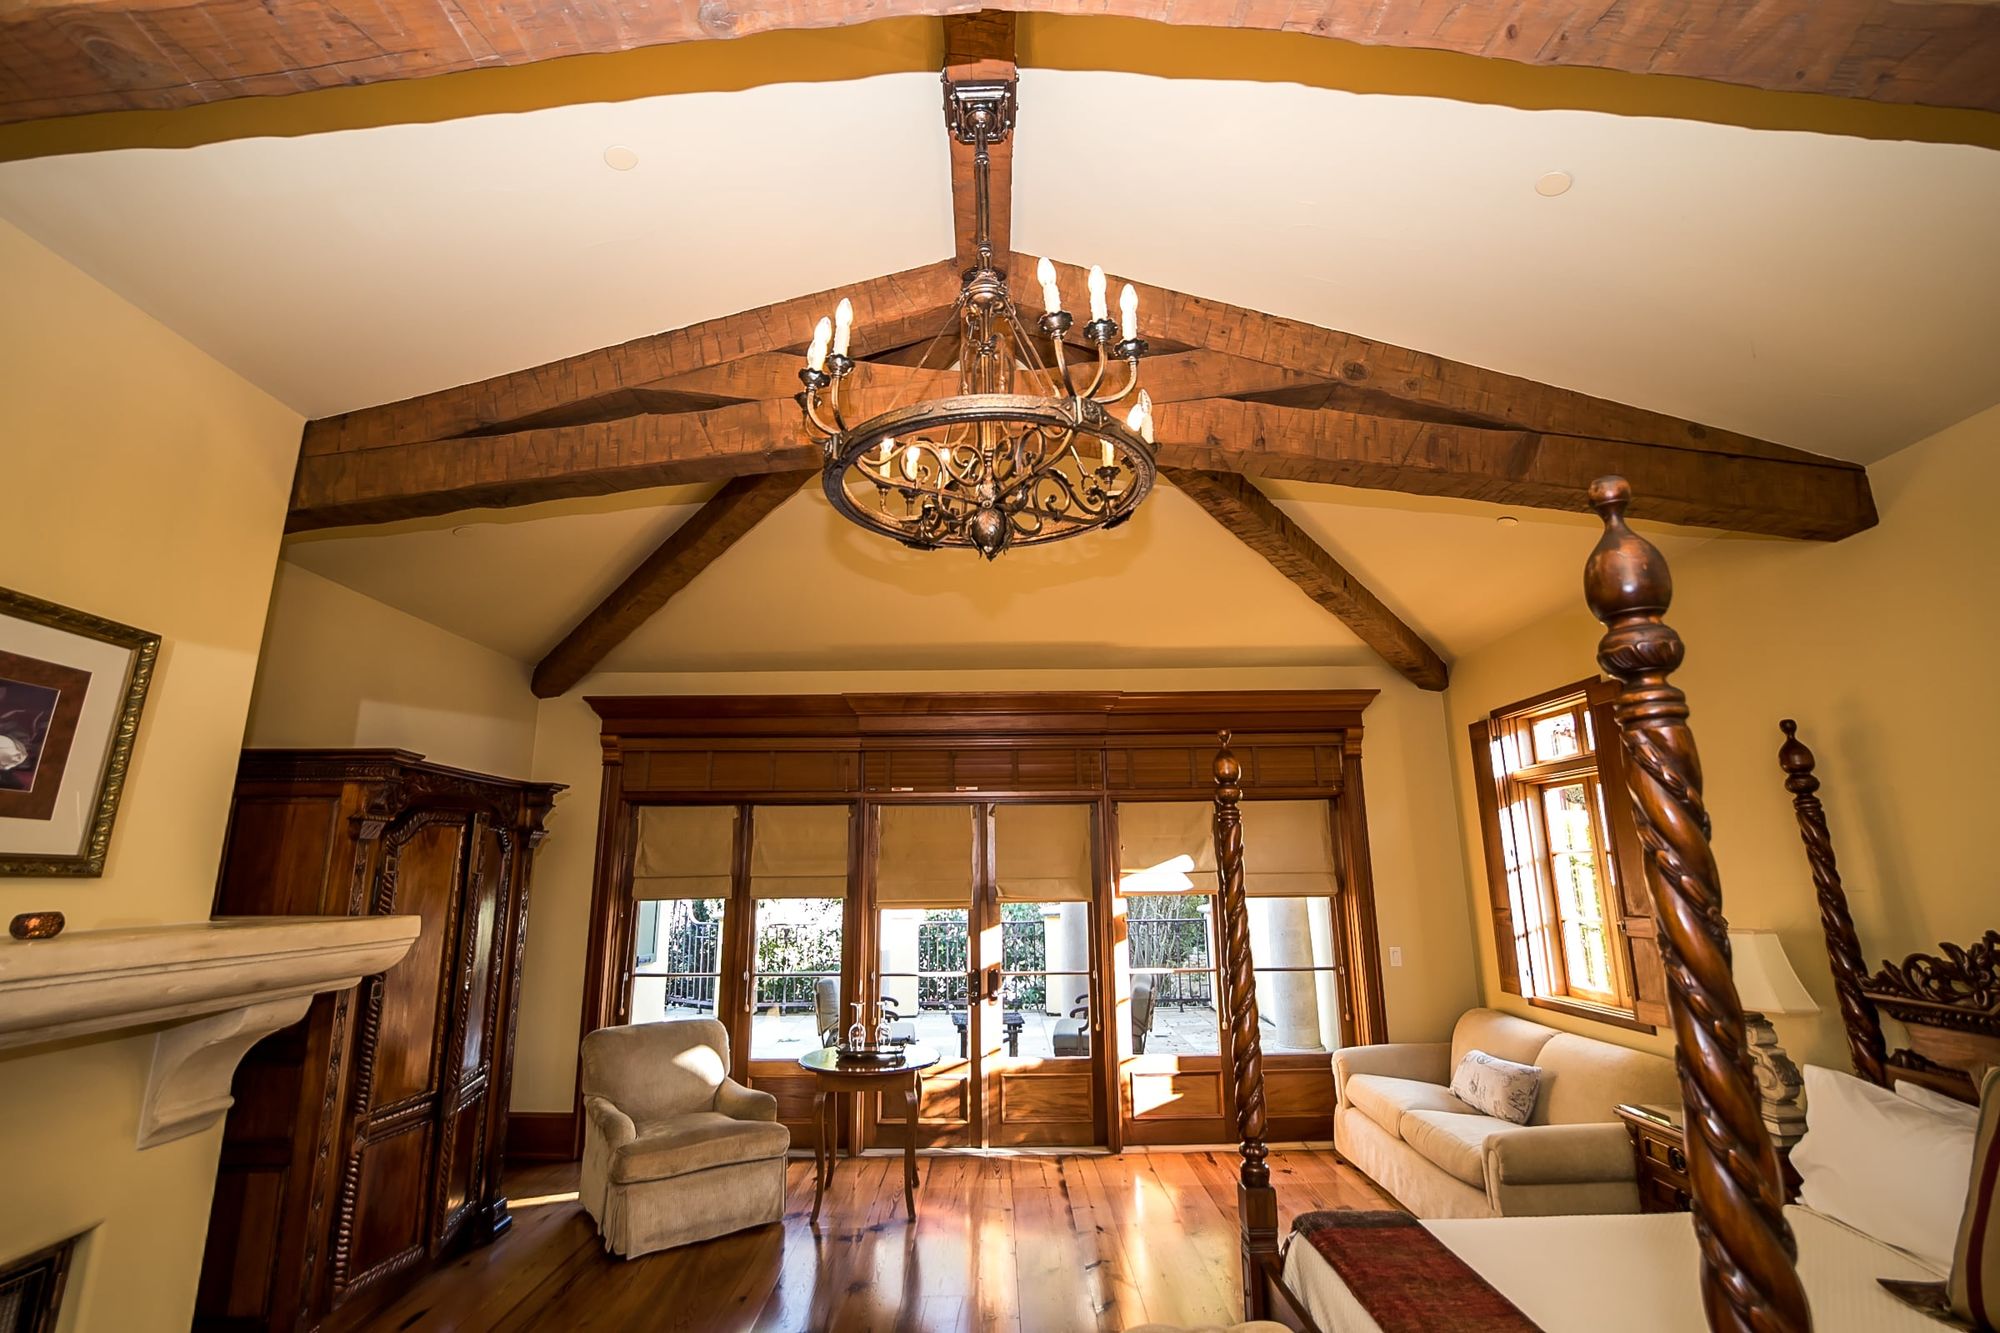 Ceiling rafters with chandelier